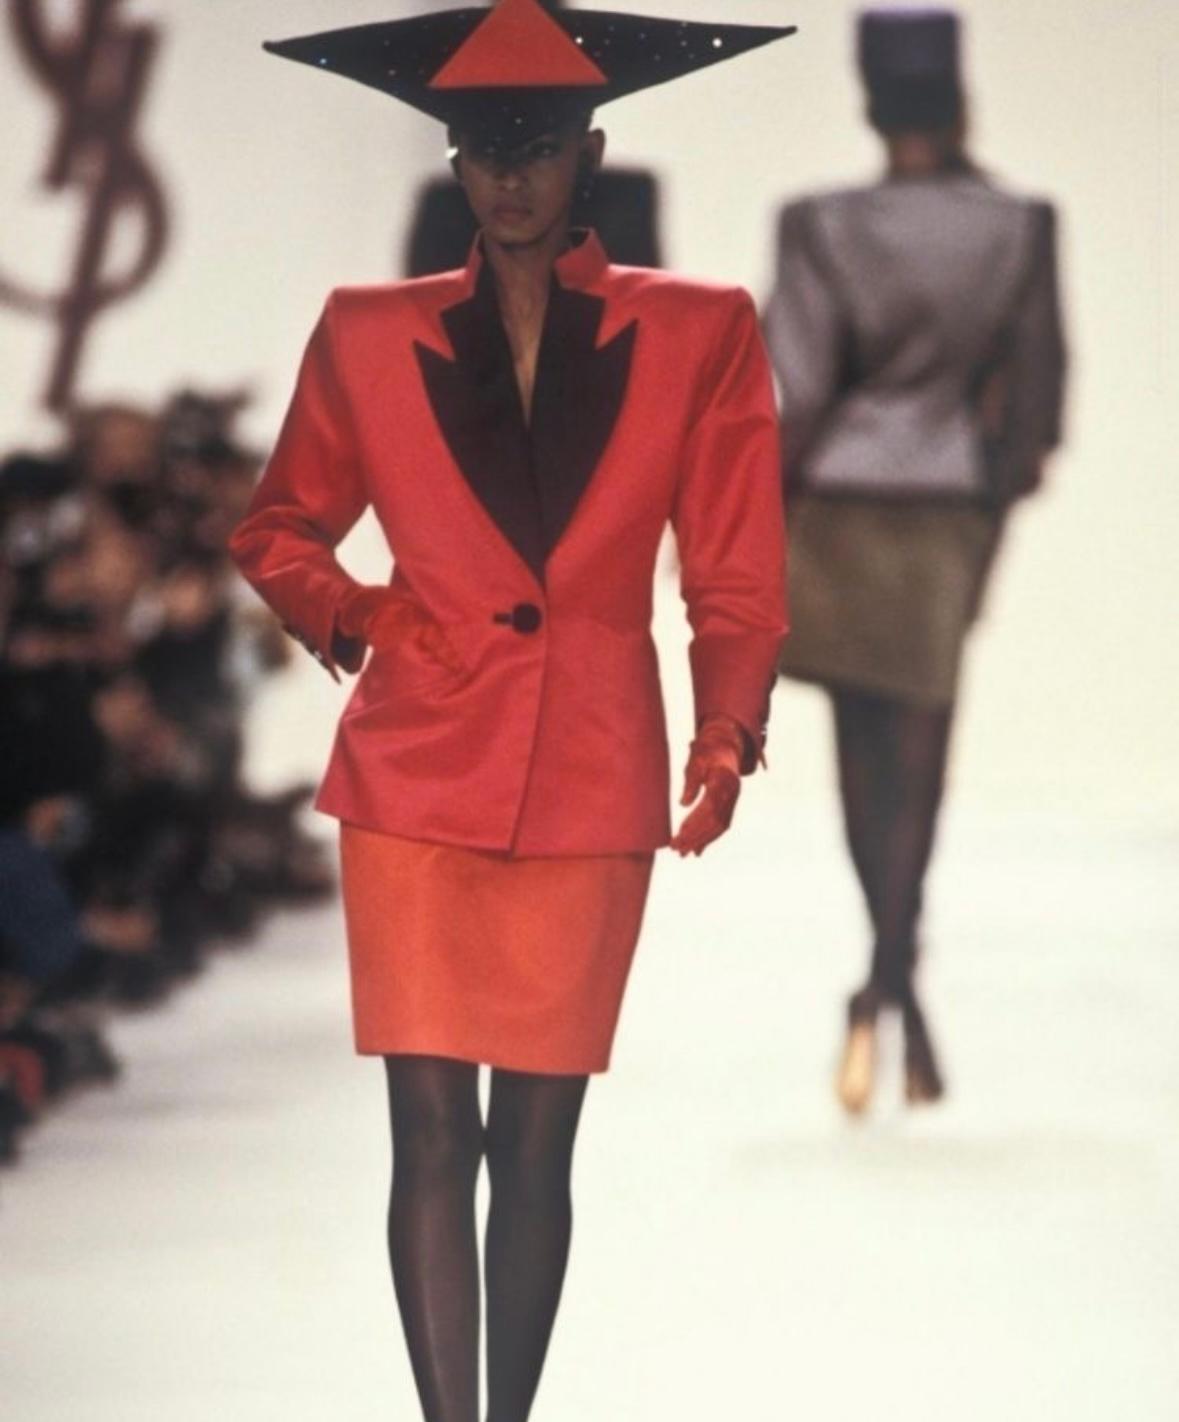 Presenting a striking red satin skirt designed by Yves Saint Laurent for his Fall/Winter 1988 collection. Multiple versions of this classic skirt debuted on the season's runway. The pockets were perfectly placed to disappear under an accompanying